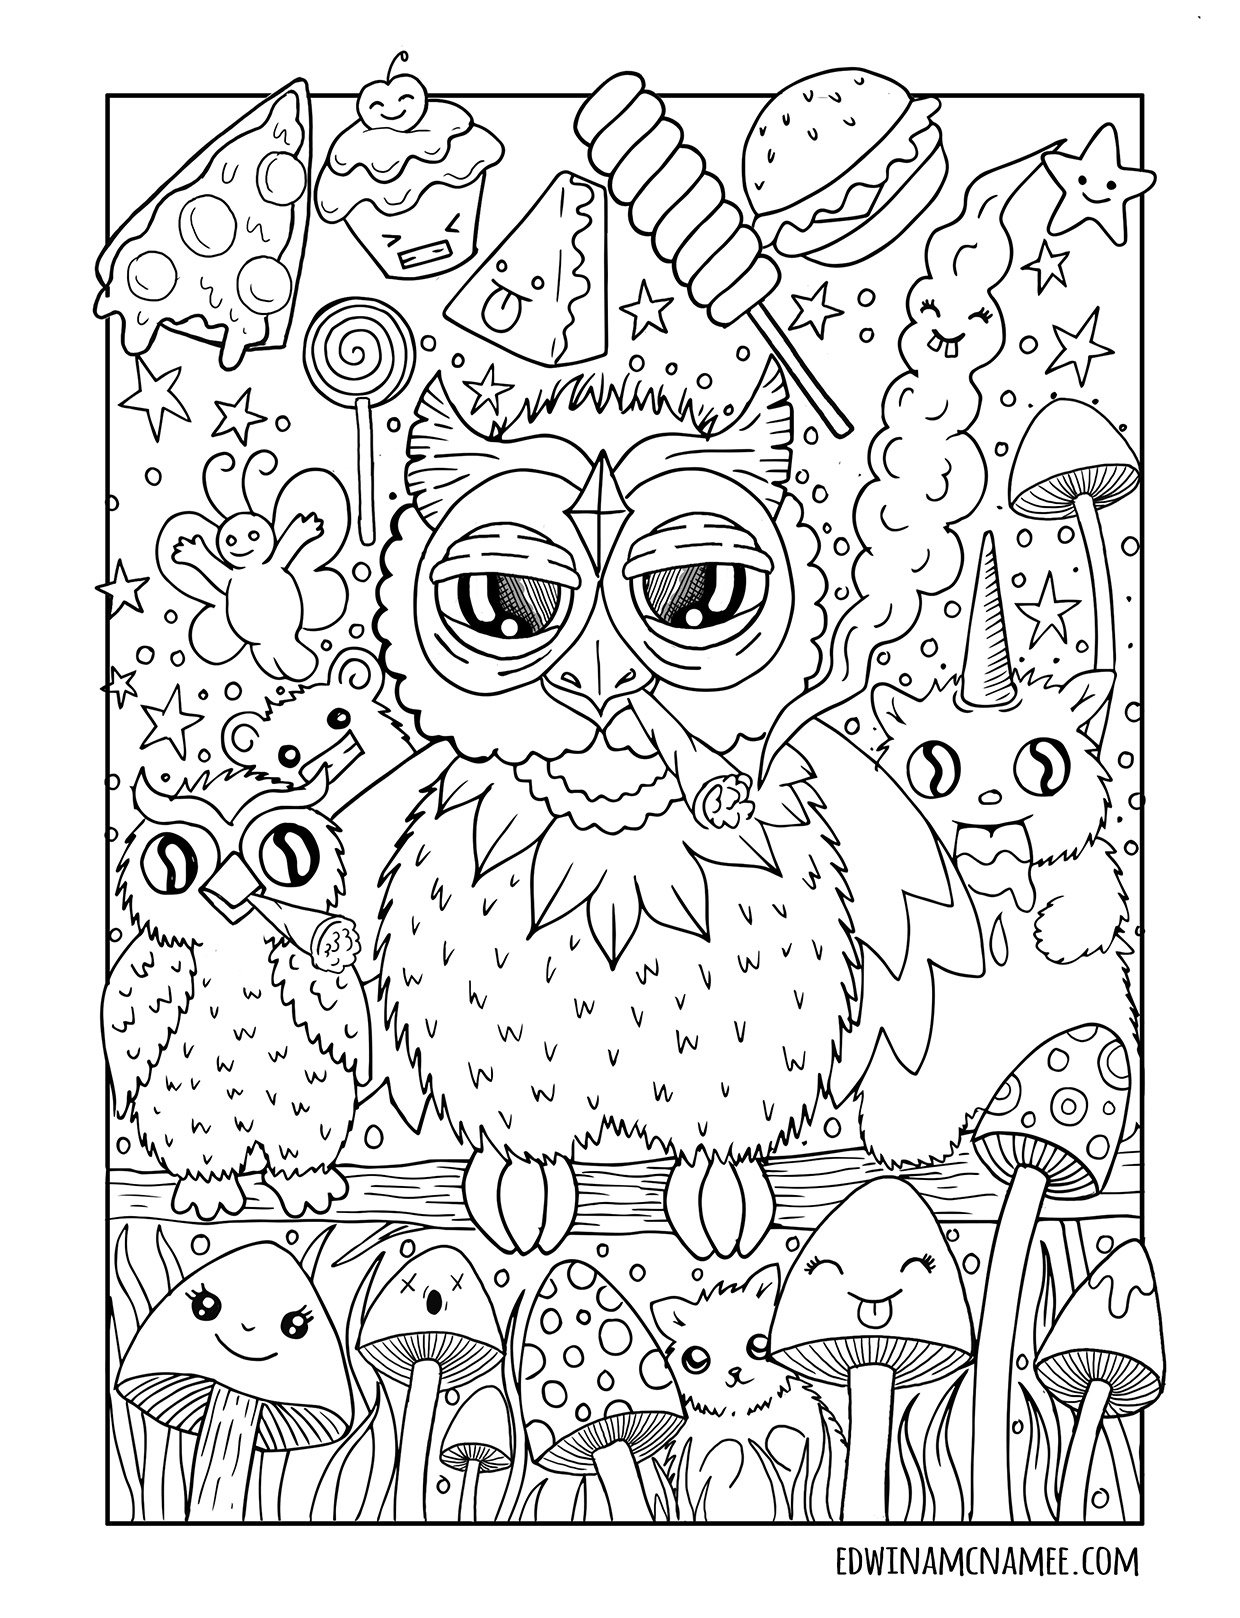 The Stoner’s Coloring Book